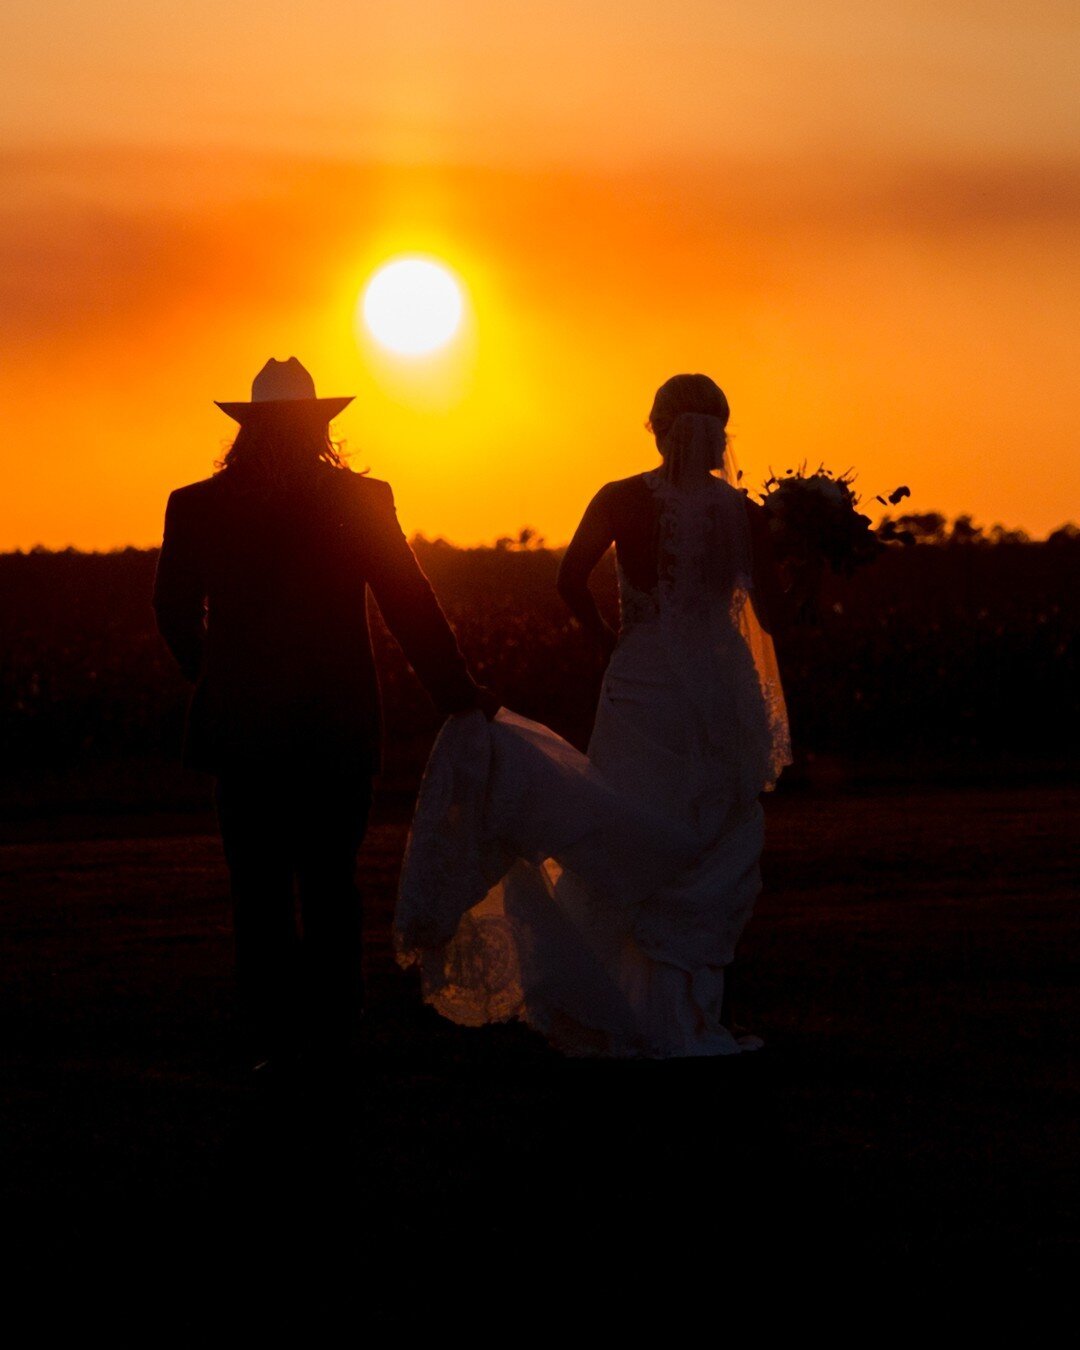 Love shines brightest in the golden hour! ✨💍 Capture the magic of your engagement against the backdrop of a breathtaking sunset at Dutch Ford Farm. Let's create timeless memories together! https://i.mtr.cool/yotjxshcze #SunsetEngagement #GoldenHourL